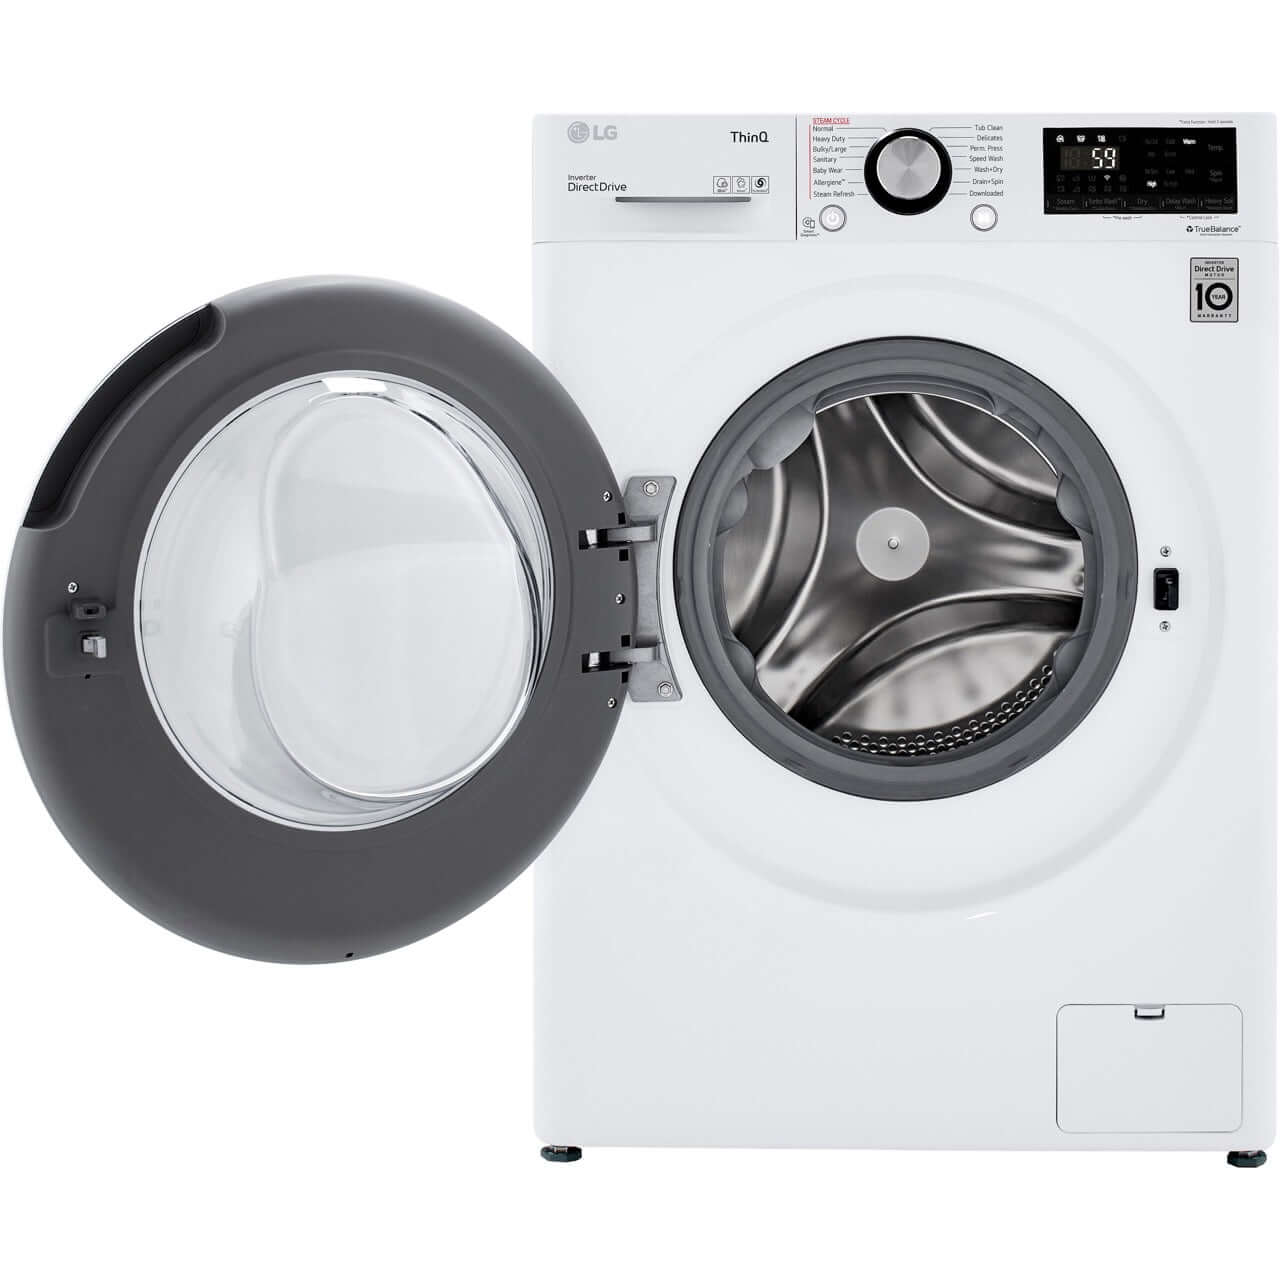 LG 2.4-Cu.ft. Smart Wi-Fi Enabled Compact Front Load All-In-One Washer/Dryer Combo with Built-In Intelligence in White (WM3555HWA)